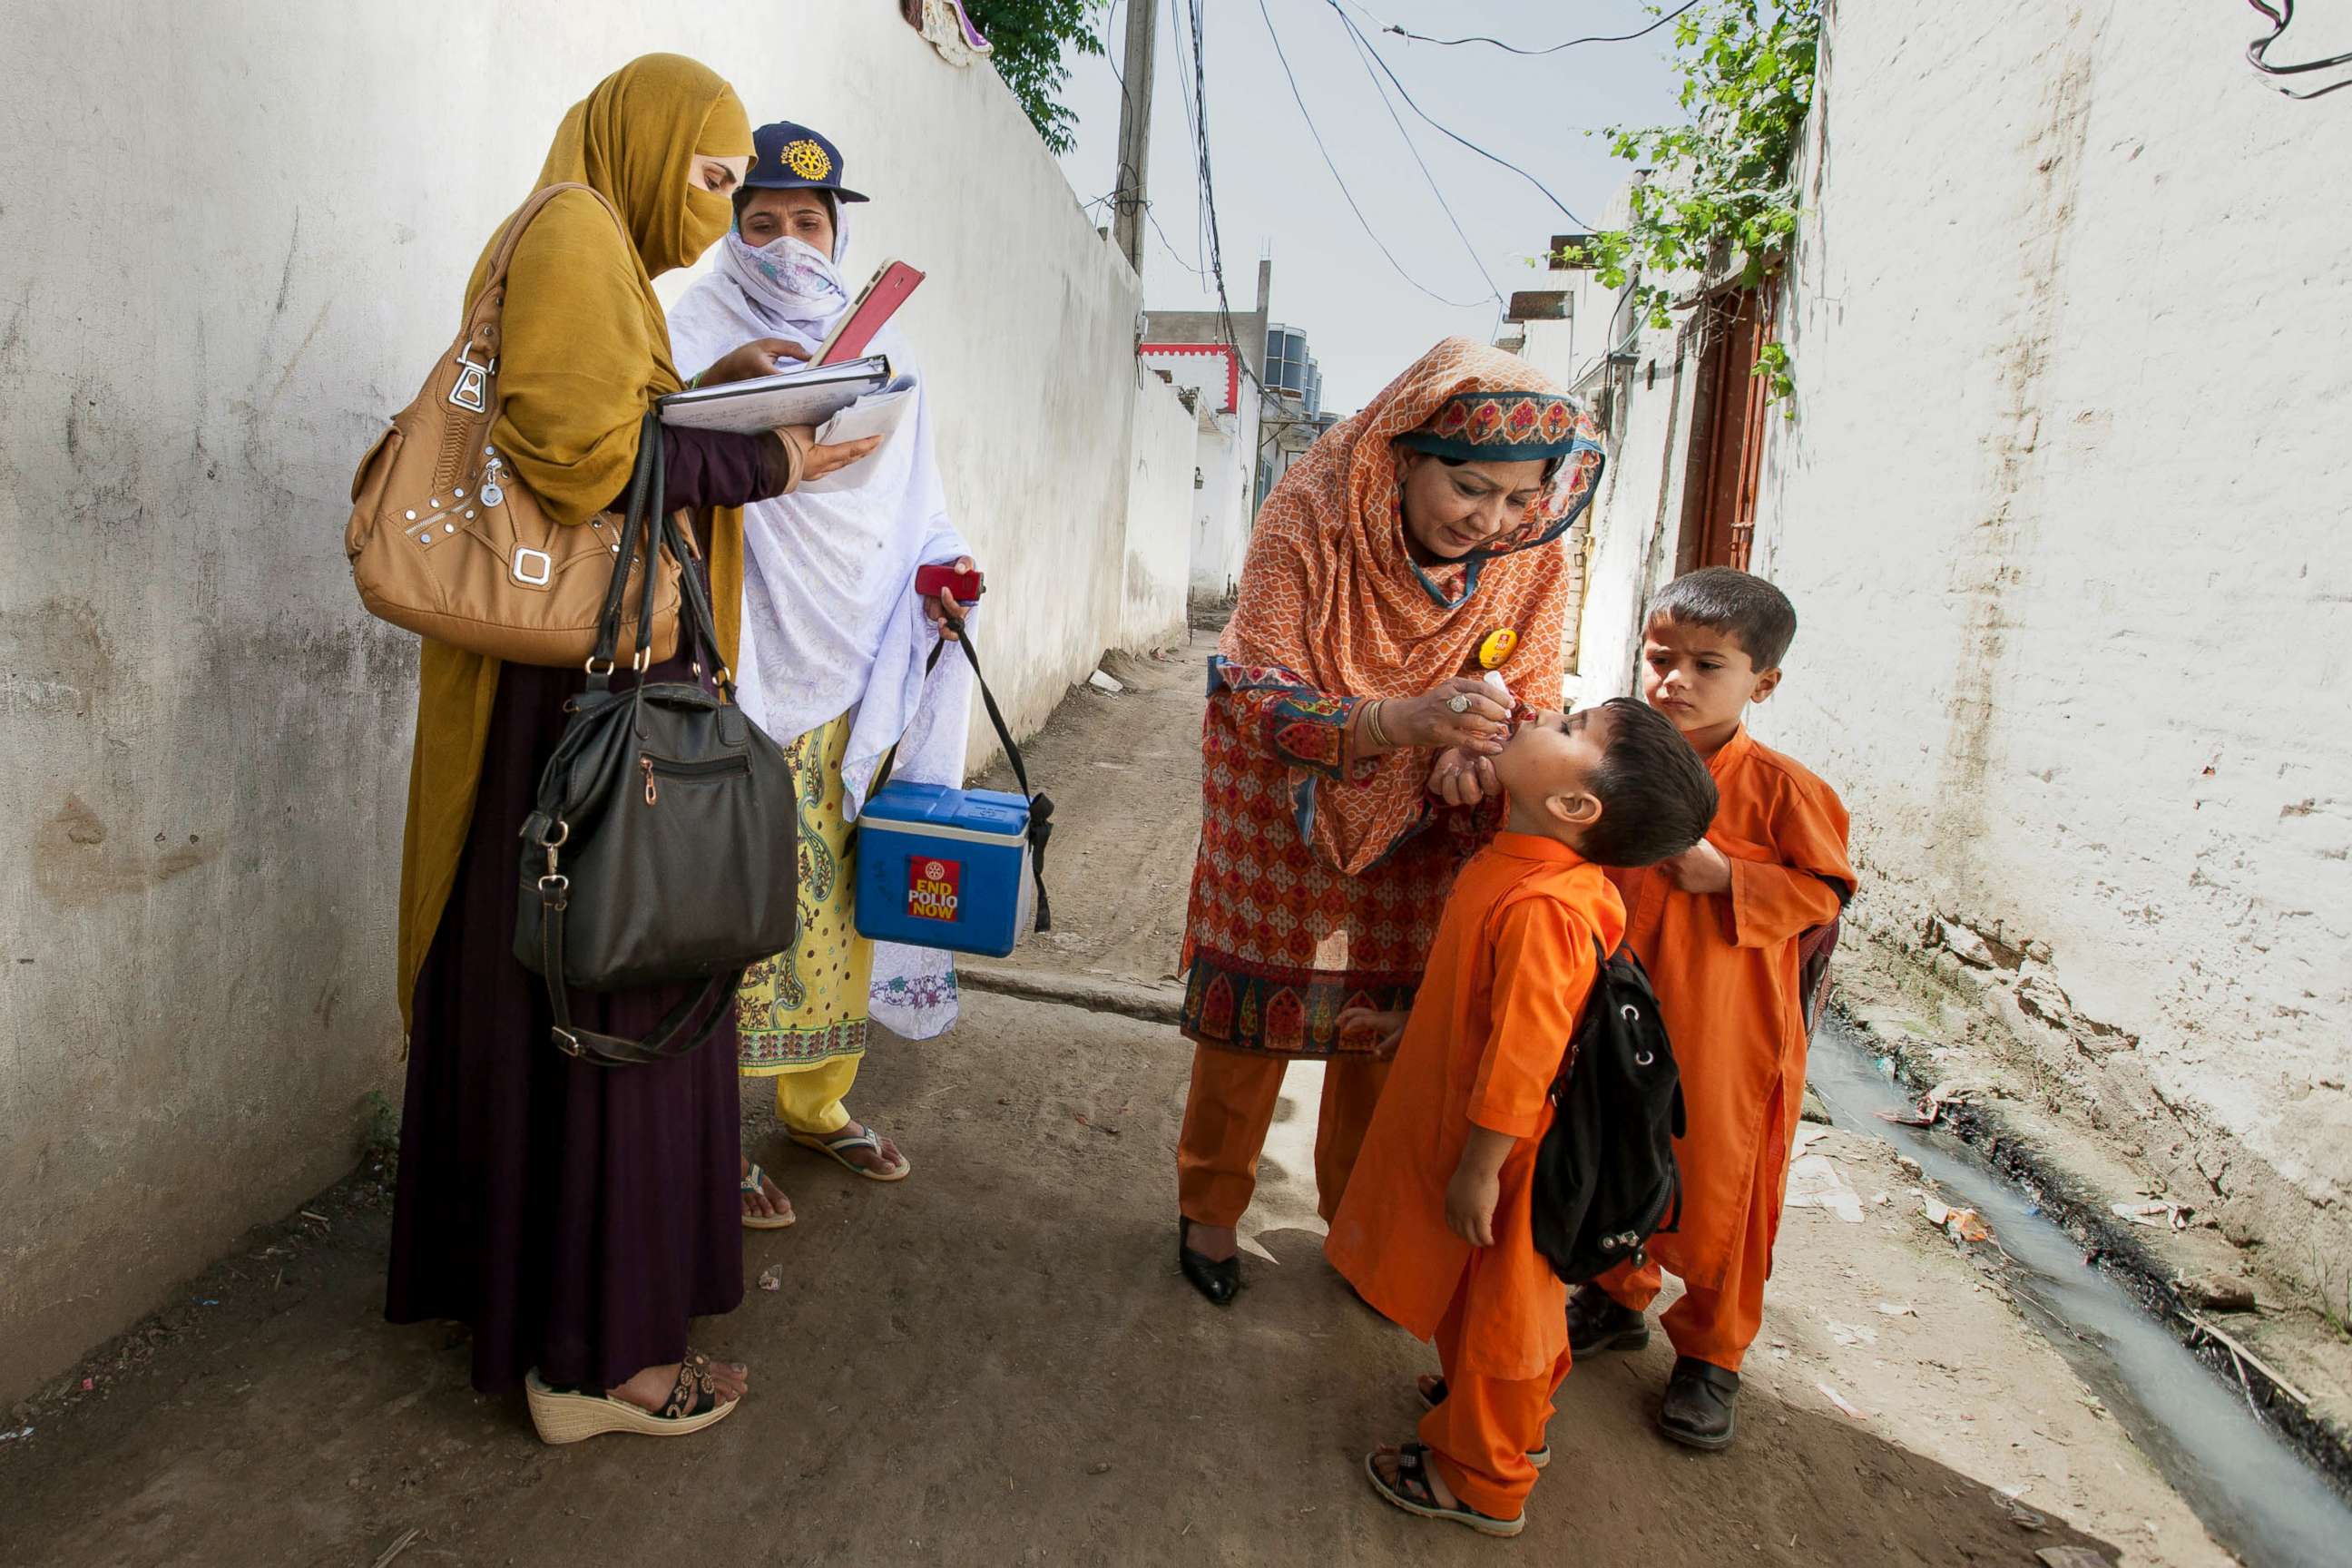 PHOTO: Polio vaccines are administered to some children.